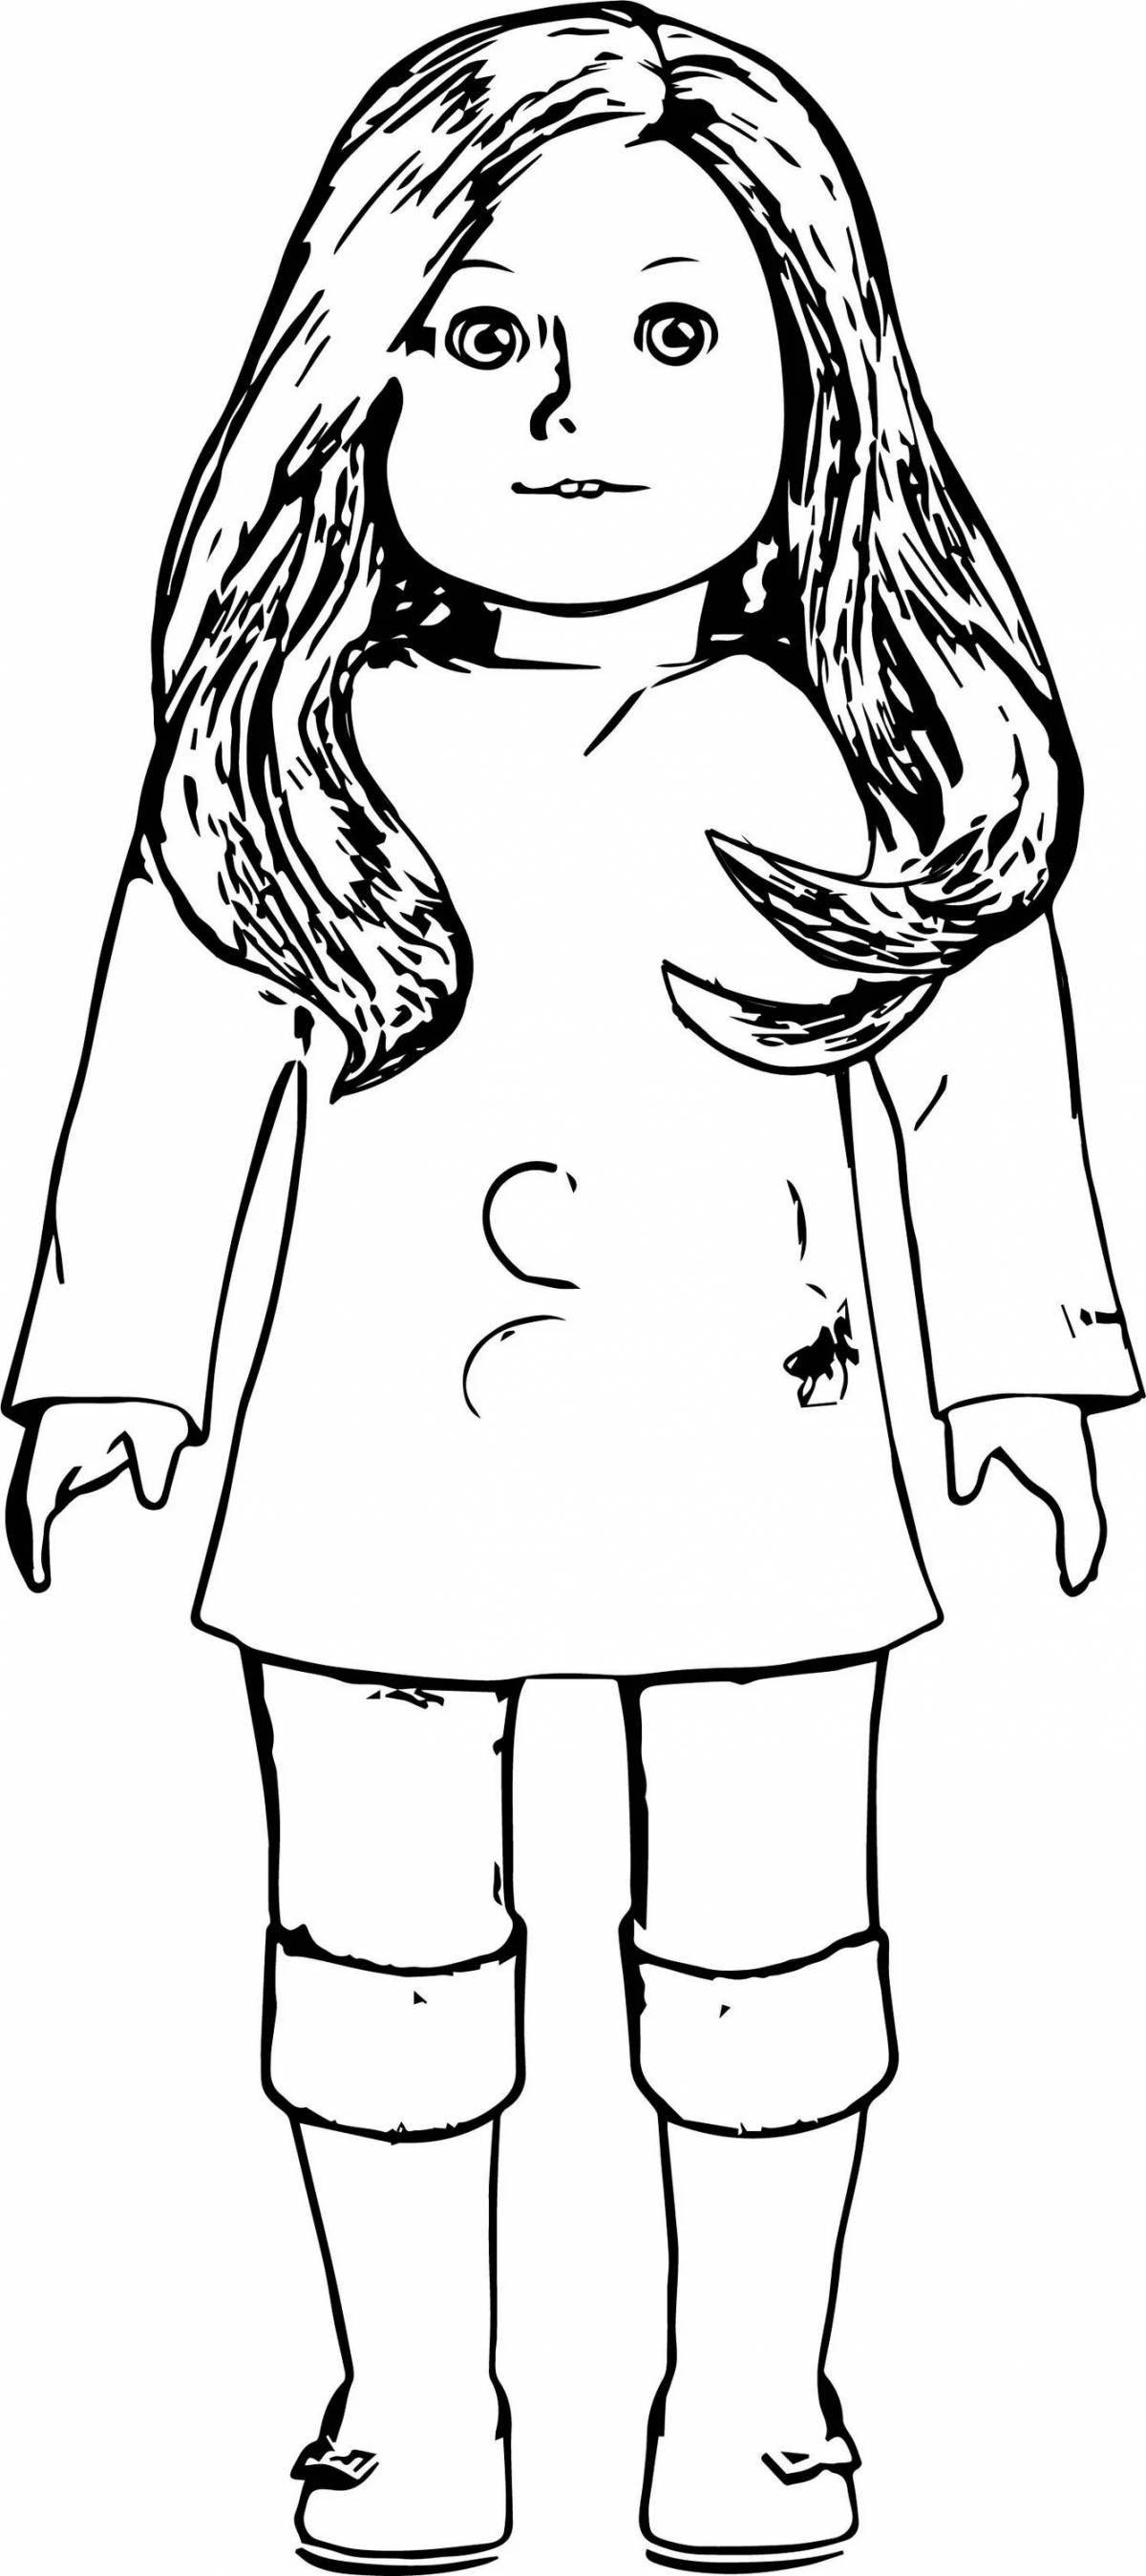 Coloring page glamorous standing girl